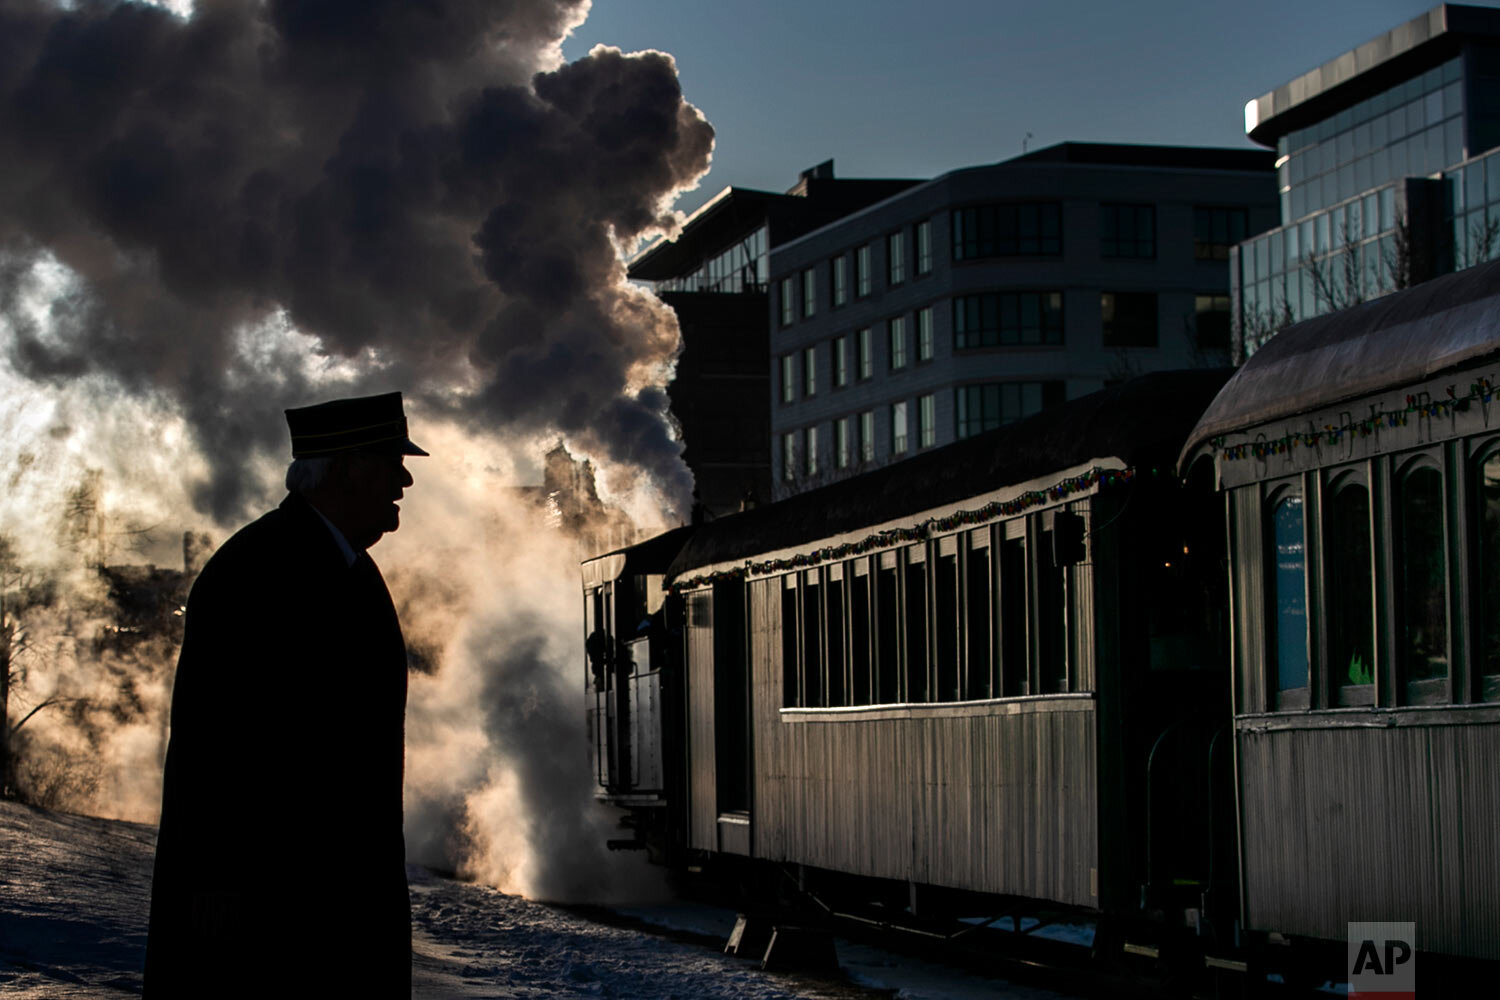  Steam billows from a locomotive as The Polar Express departs for the "North Pole" under the watch of conductor Jerry Angier, Friday, Dec. 20, 2019, in Portland, Maine. The annual holiday journey is staffed mostly by volunteers and is the largest ann